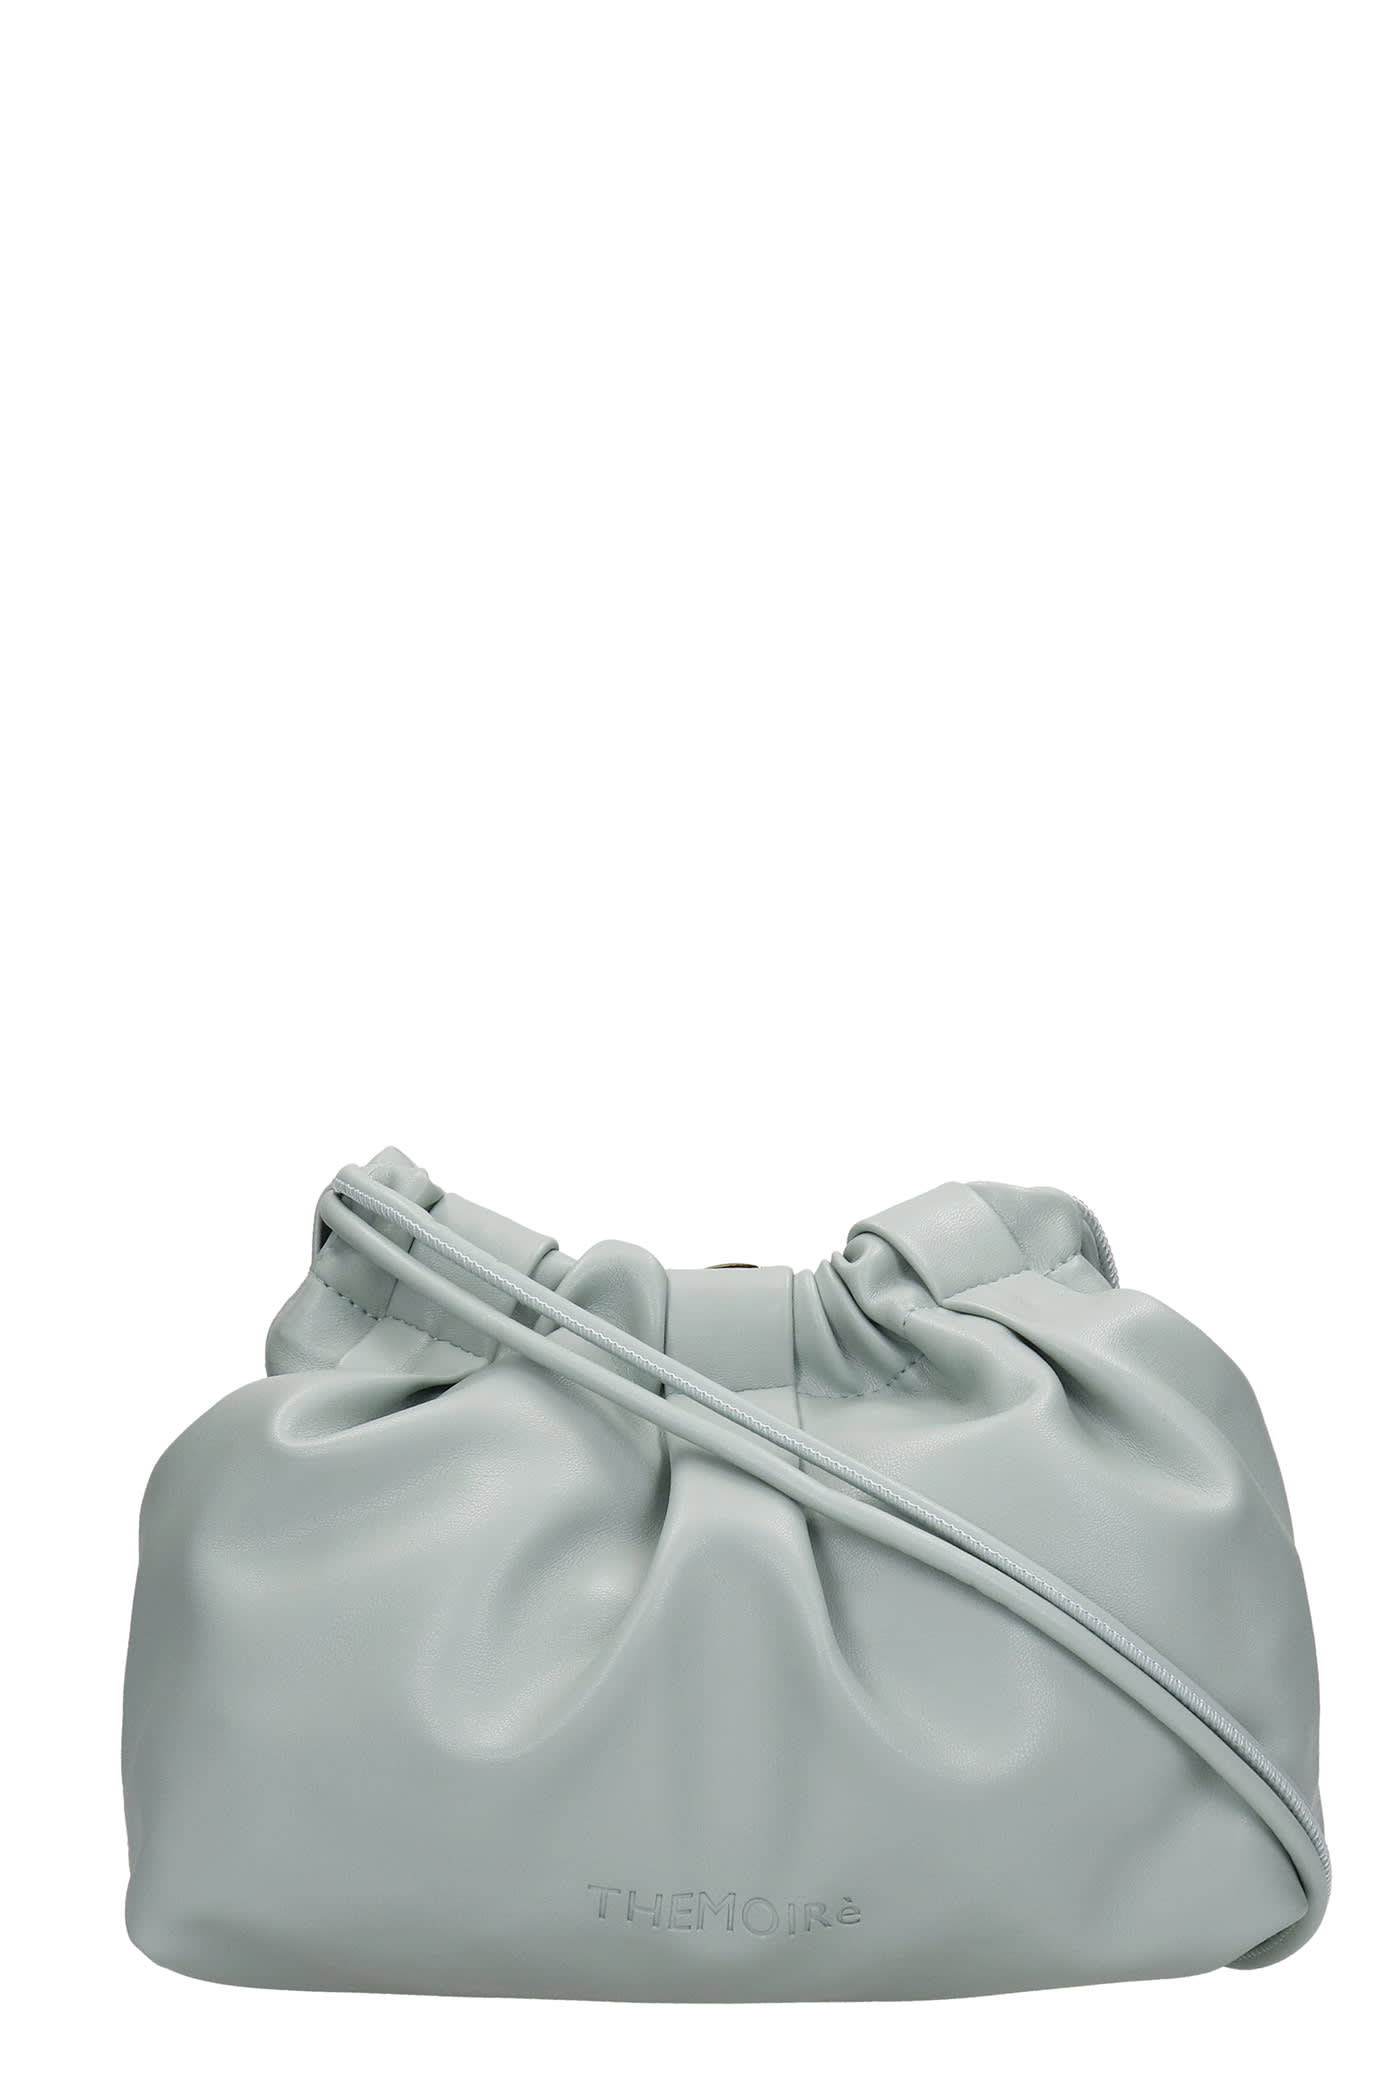 THEMOIRè Tethis Basic Shoulder Bag In Cyan Faux Leather